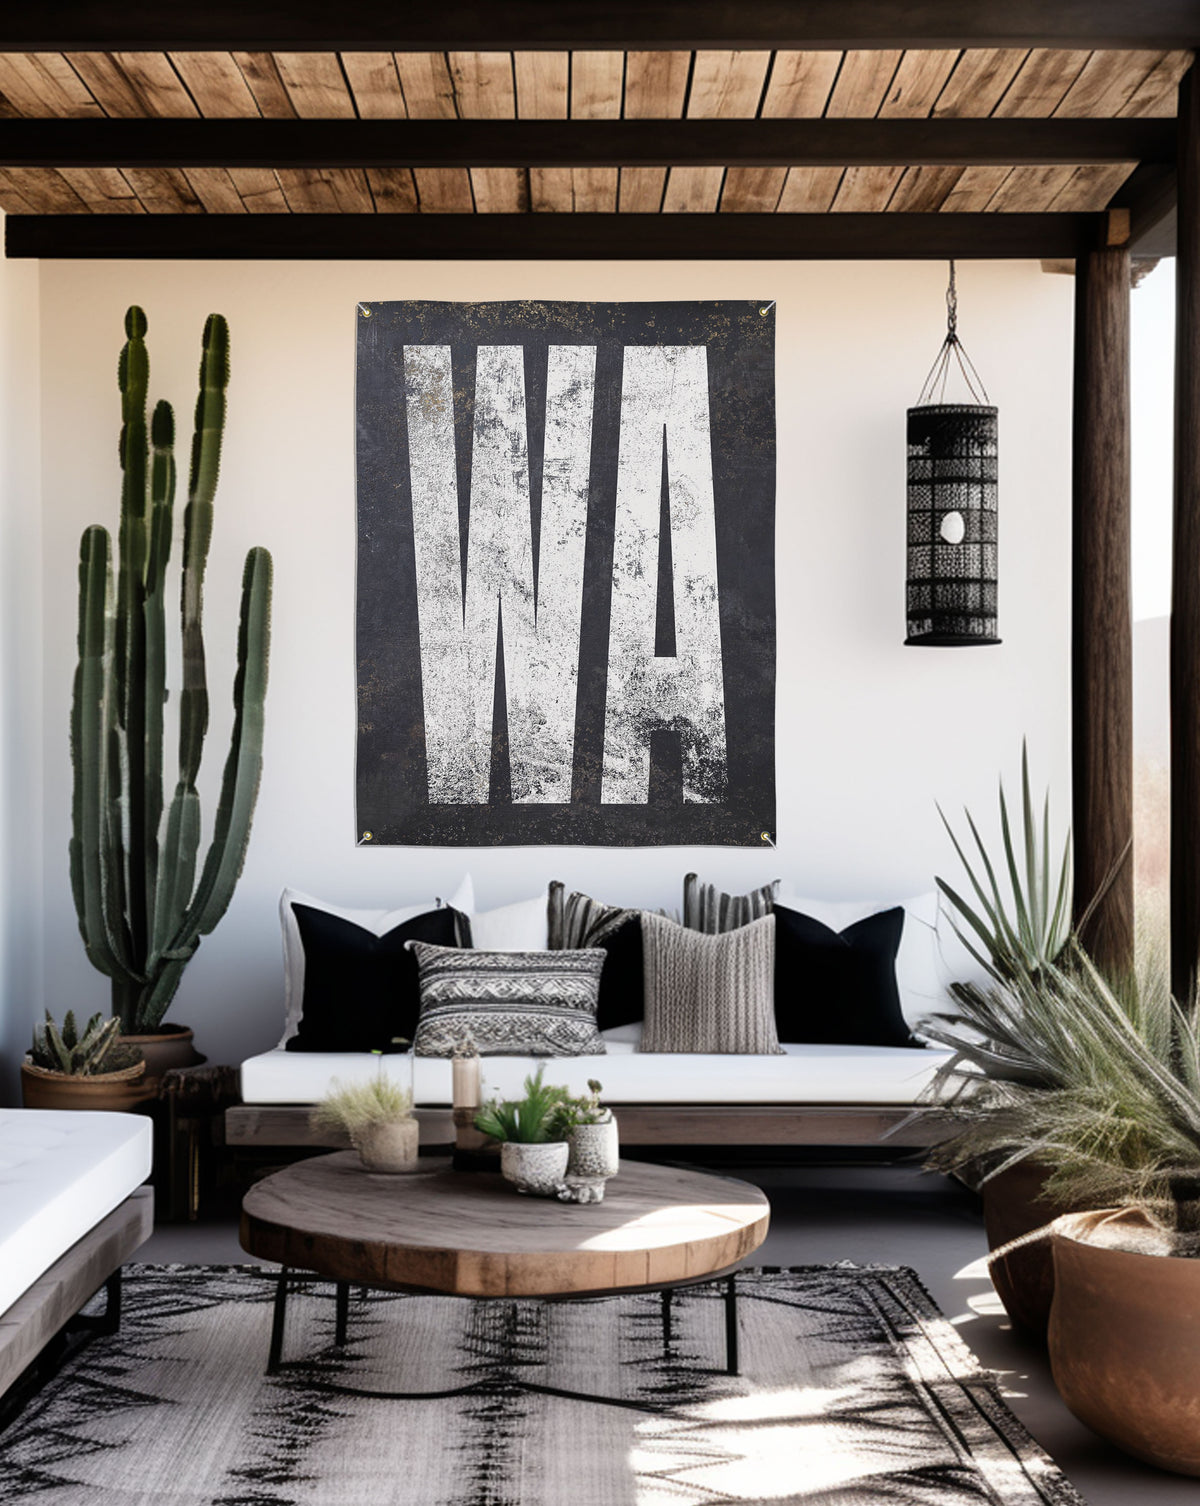 Minimalist 'WA' patio sign, offering a modern touch for garden decor or as an elegant backyard bar accent.